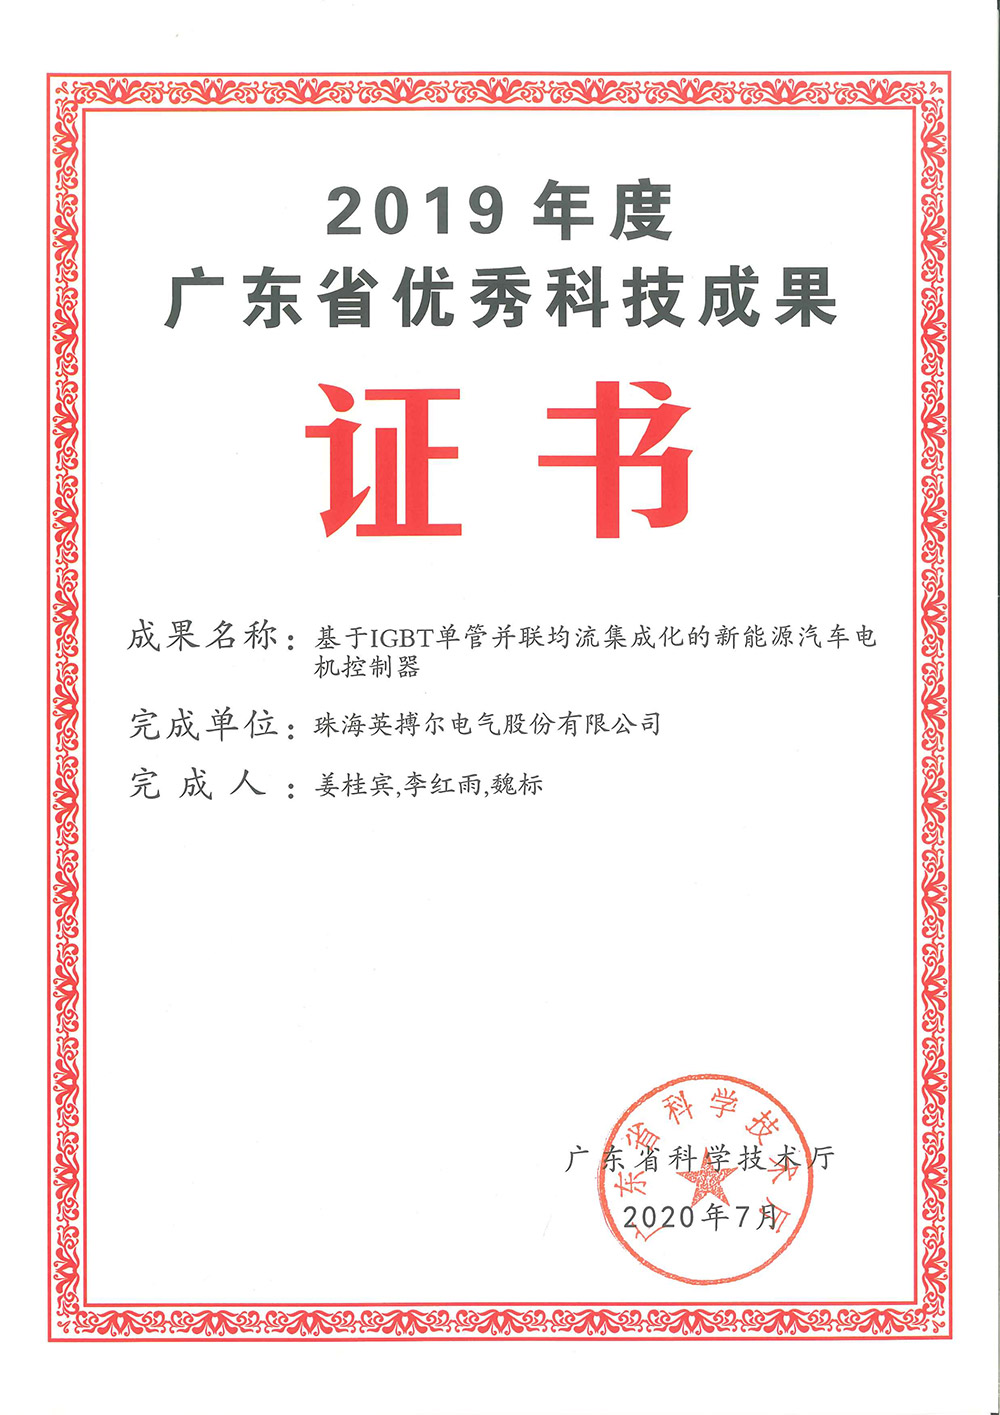 Outstanding Scientific and Technological Achievements of Guangdong Province